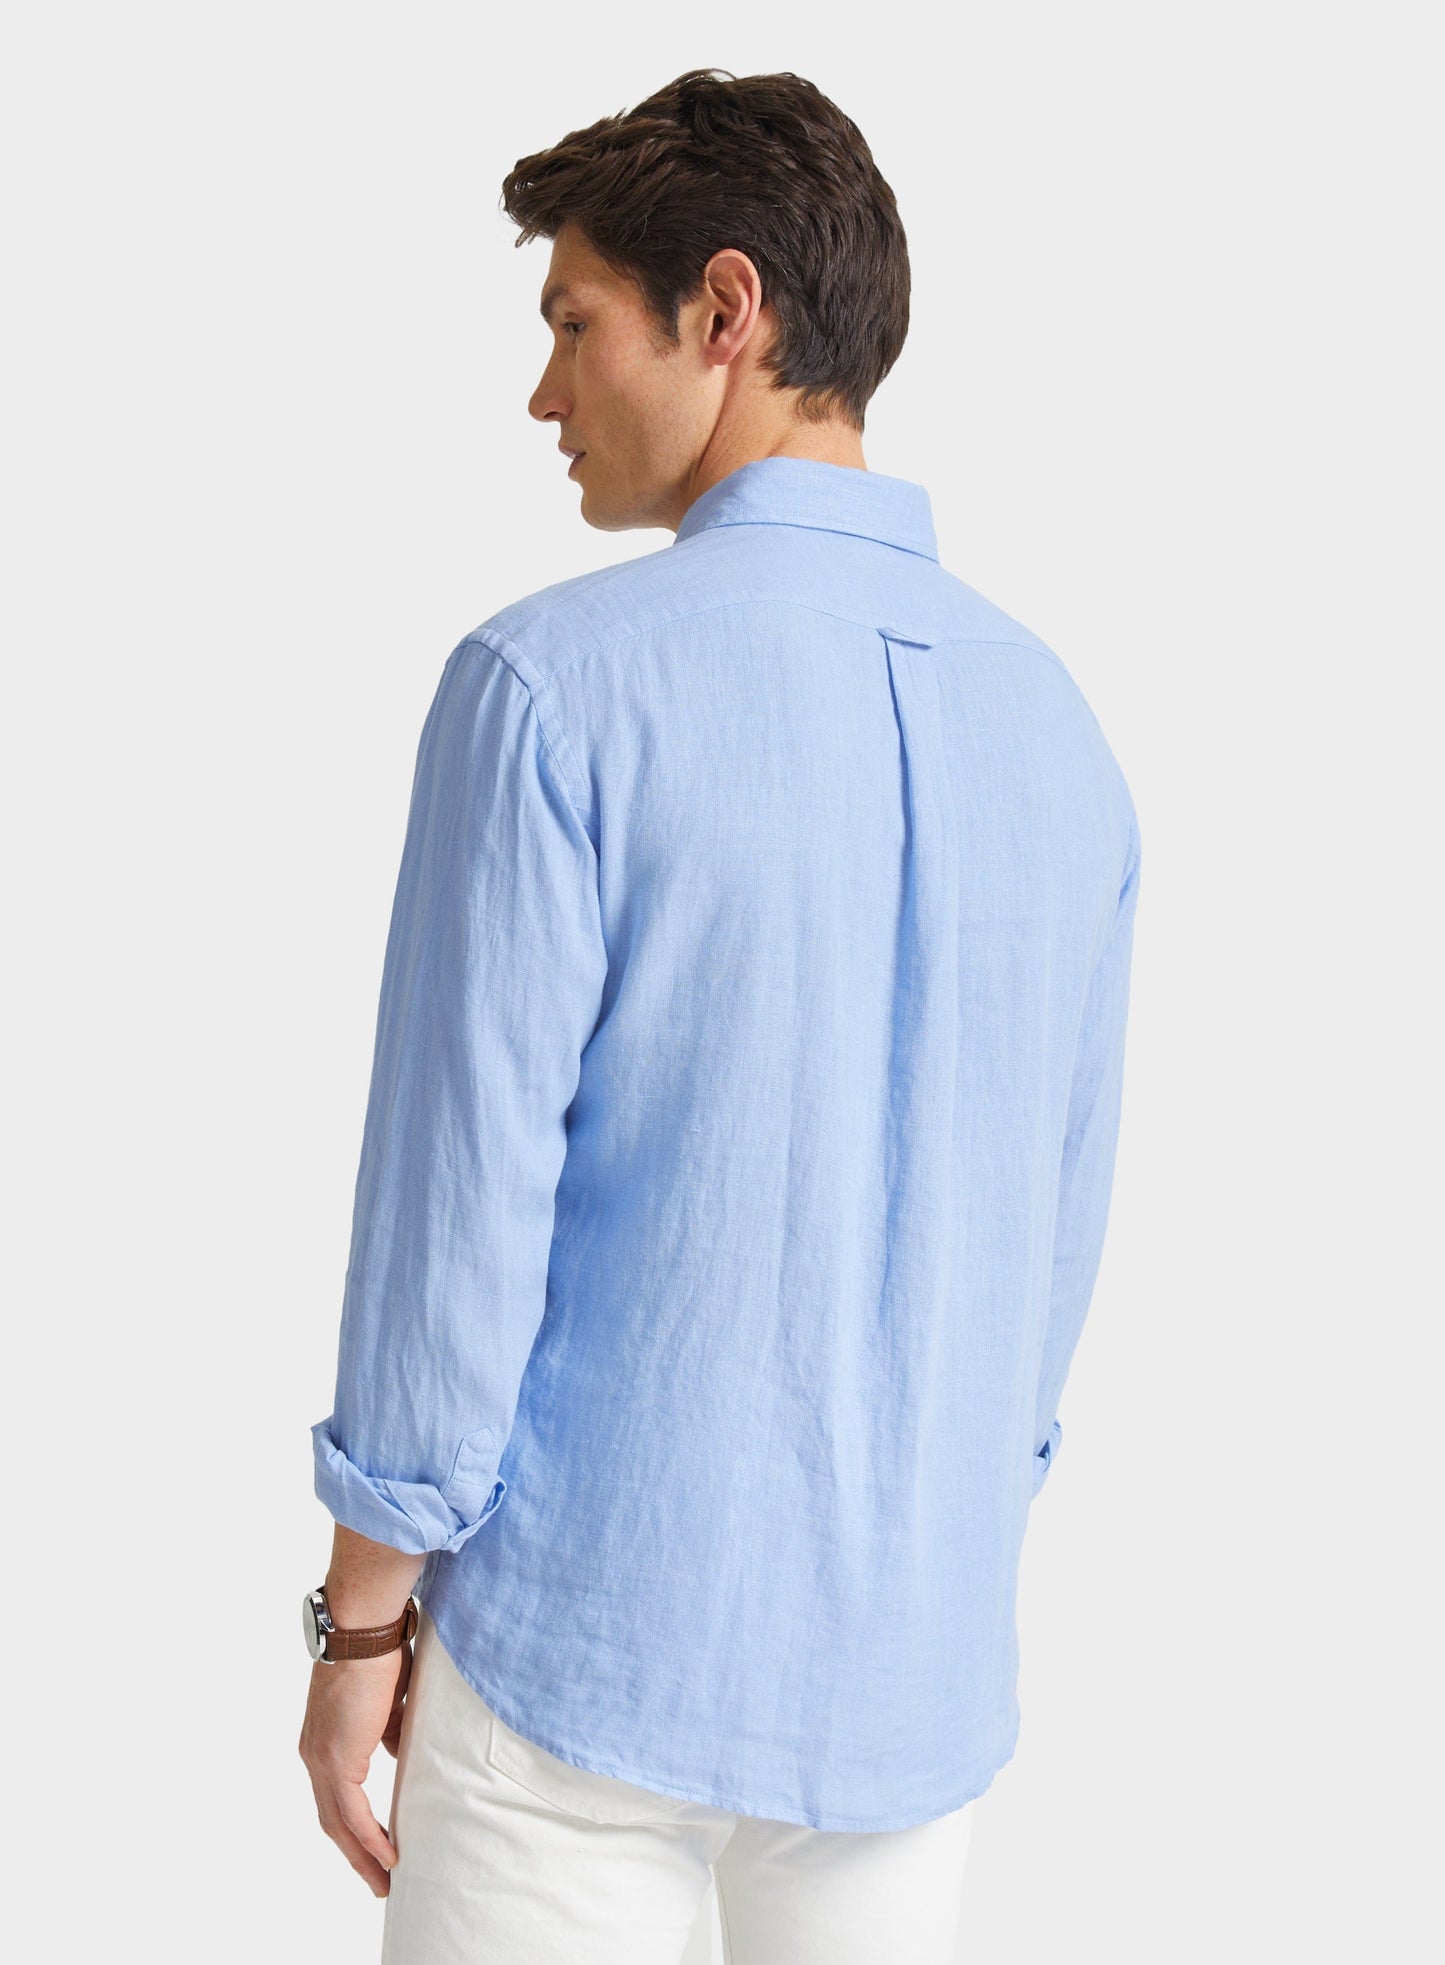 Classic Fit Linen Shirt in Mid Blue